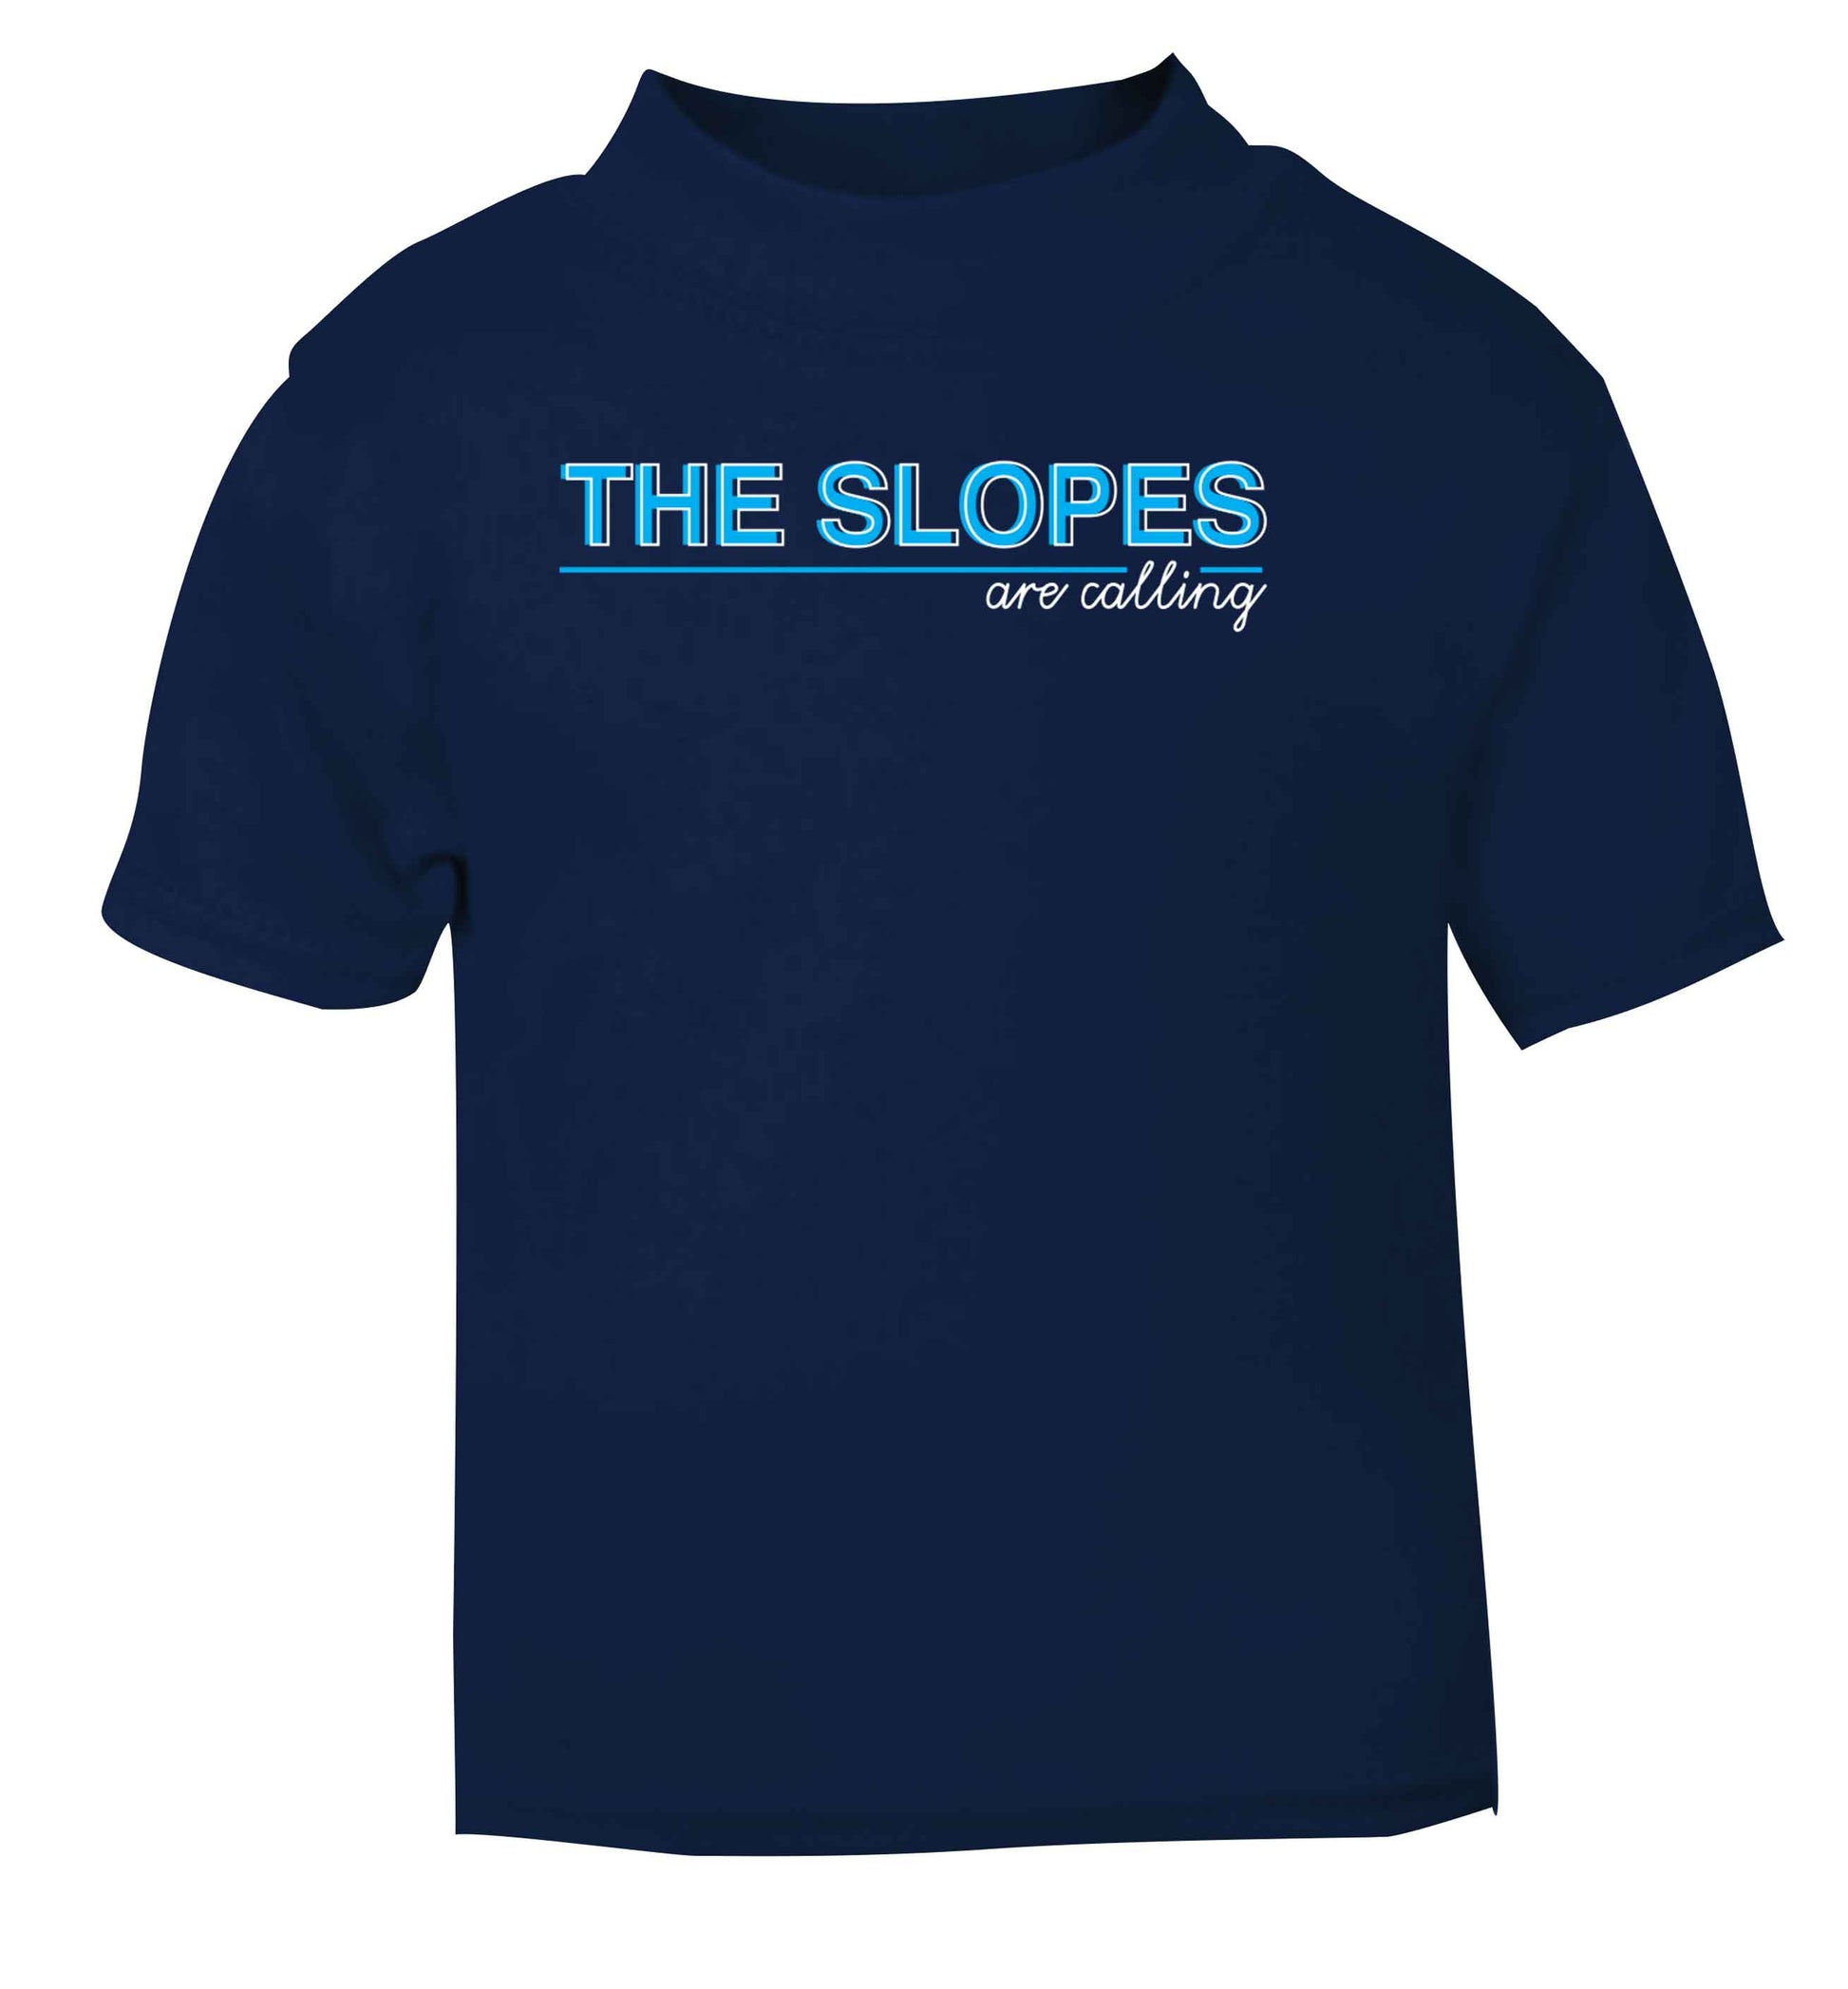 The slopes are calling navy Baby Toddler Tshirt 2 Years